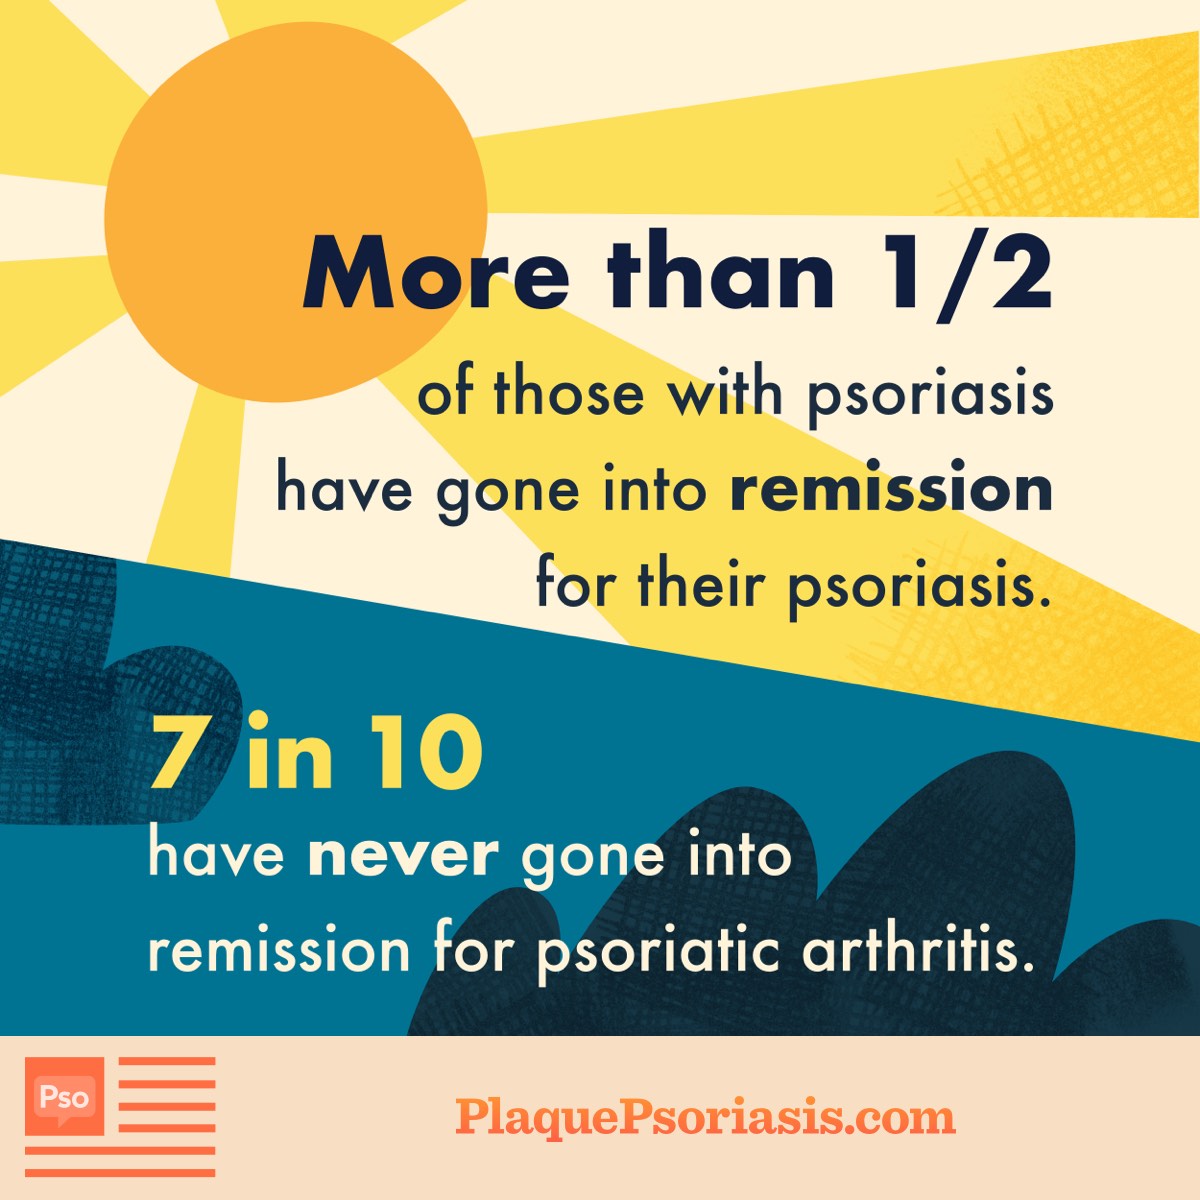 Infographic reading More than half of those with psoriasis have gone into remission for their psoriasis. 7 in 10 have never gone into remission for psoriatic arthritis.